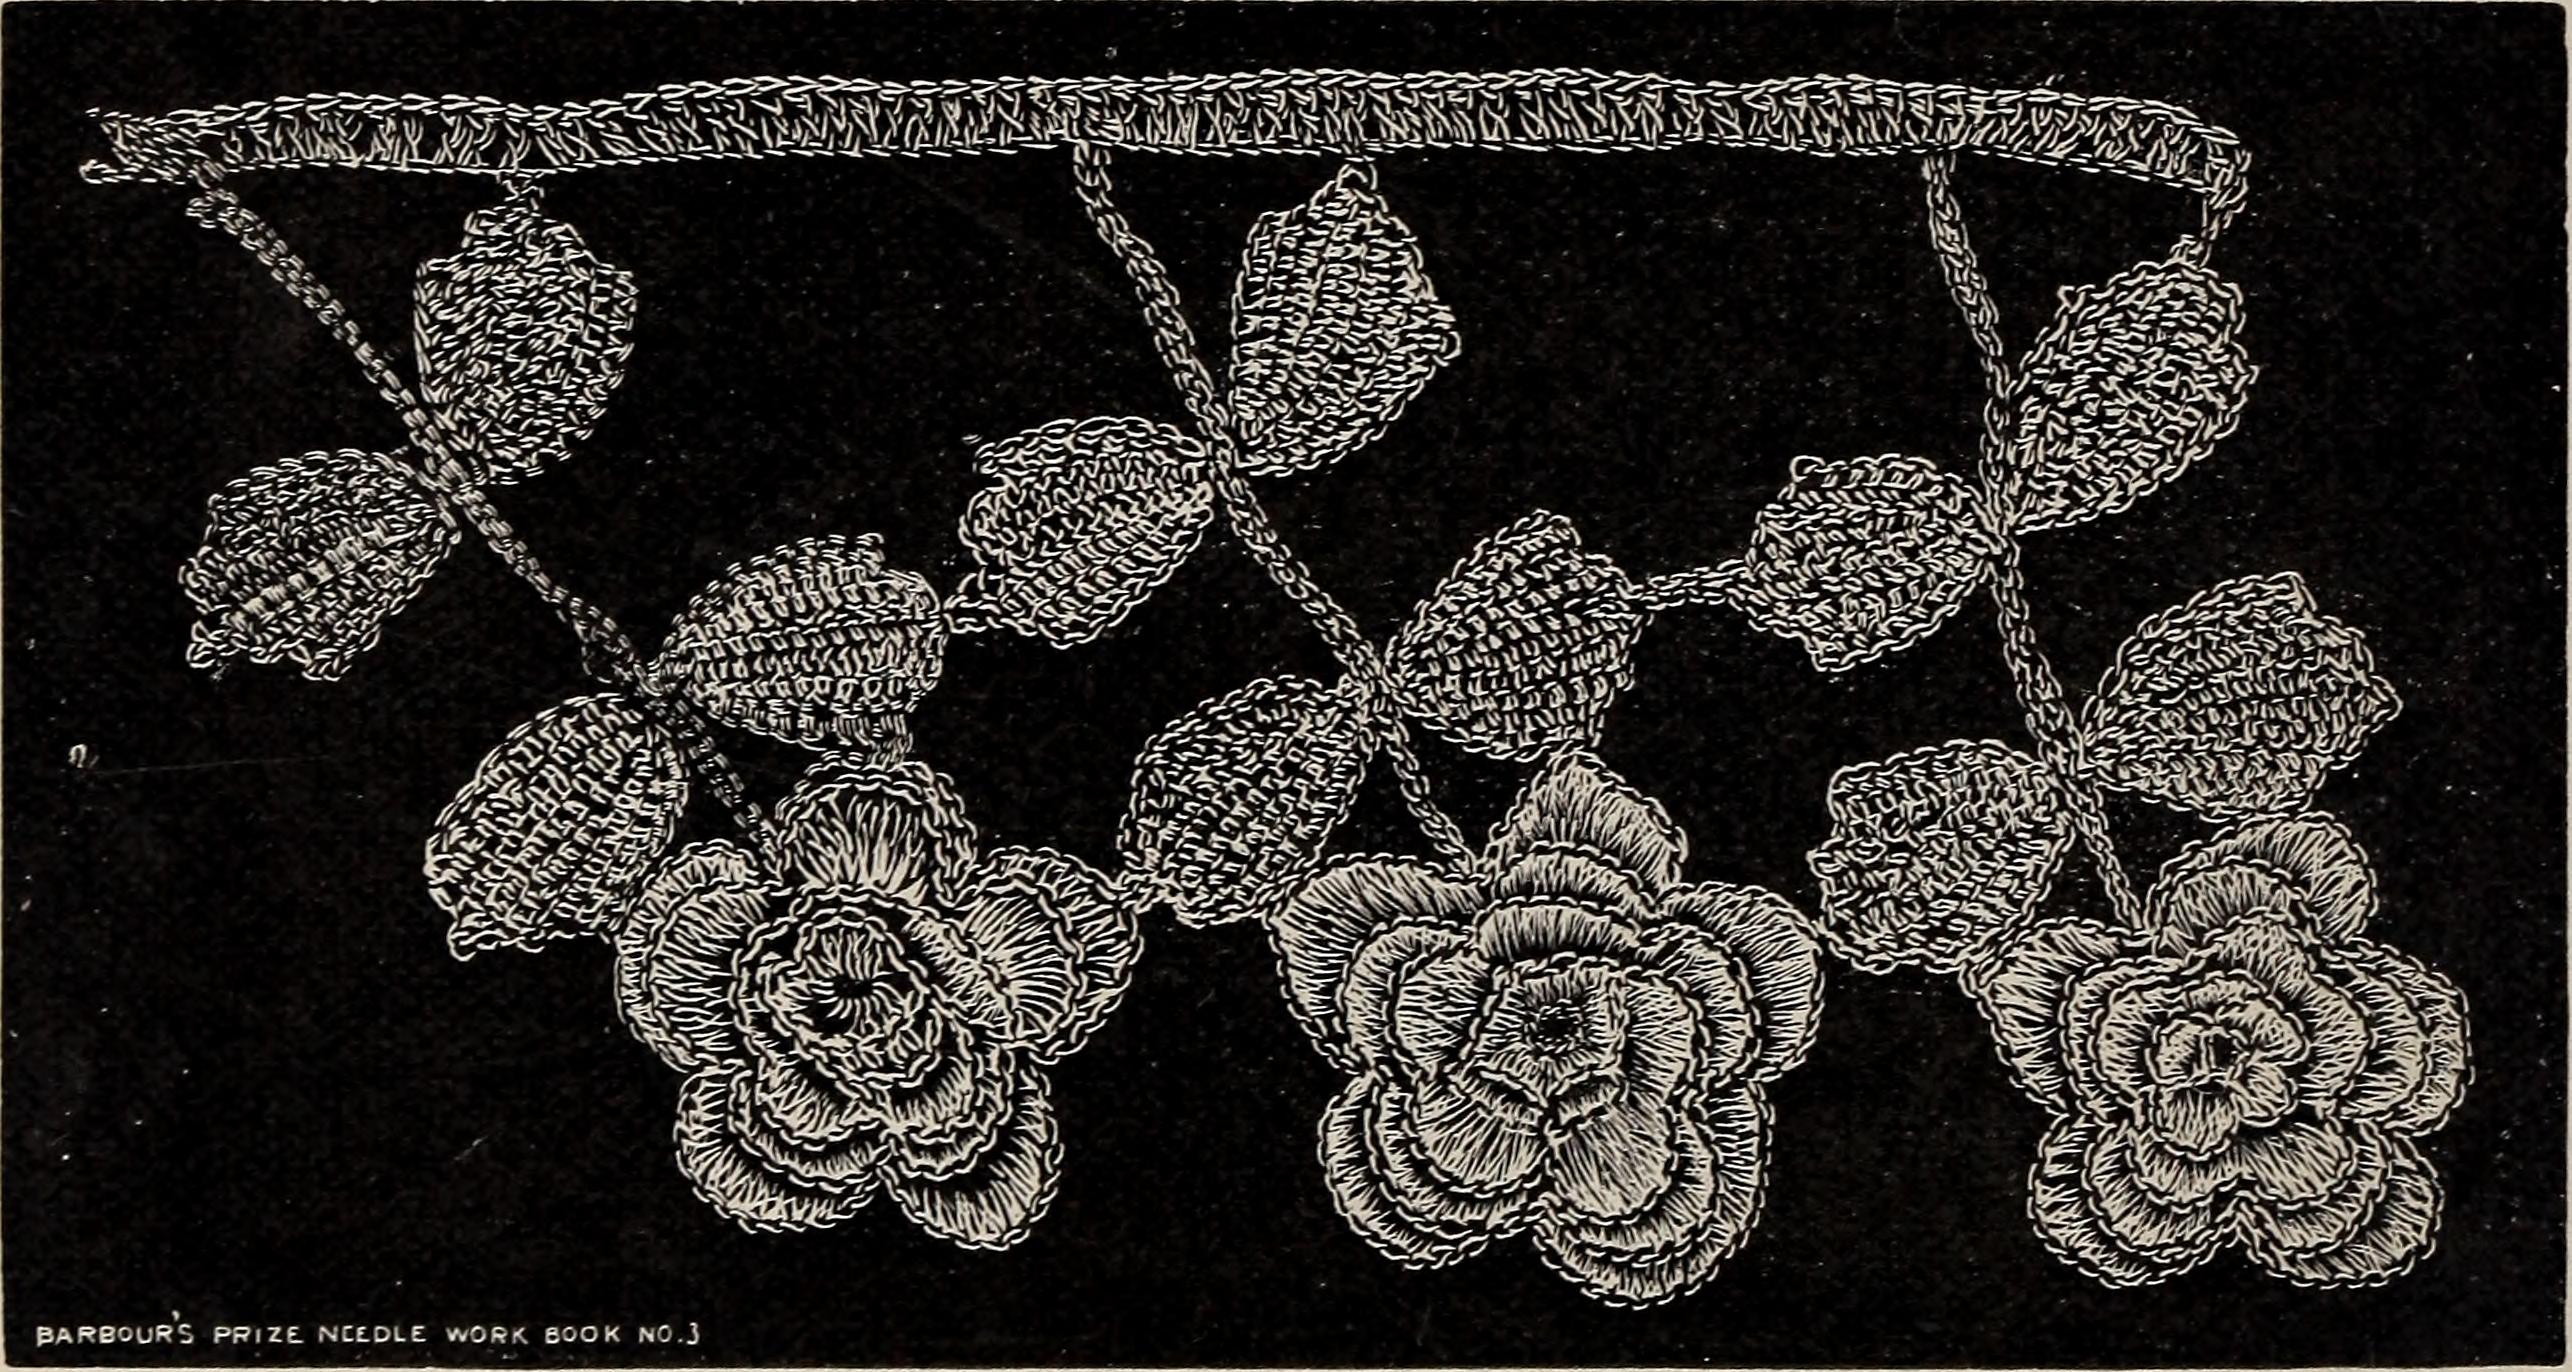 Image from page 27 of "A treatise on lace-making, embroidery, and needle-work with Irish flax threads" (1892)